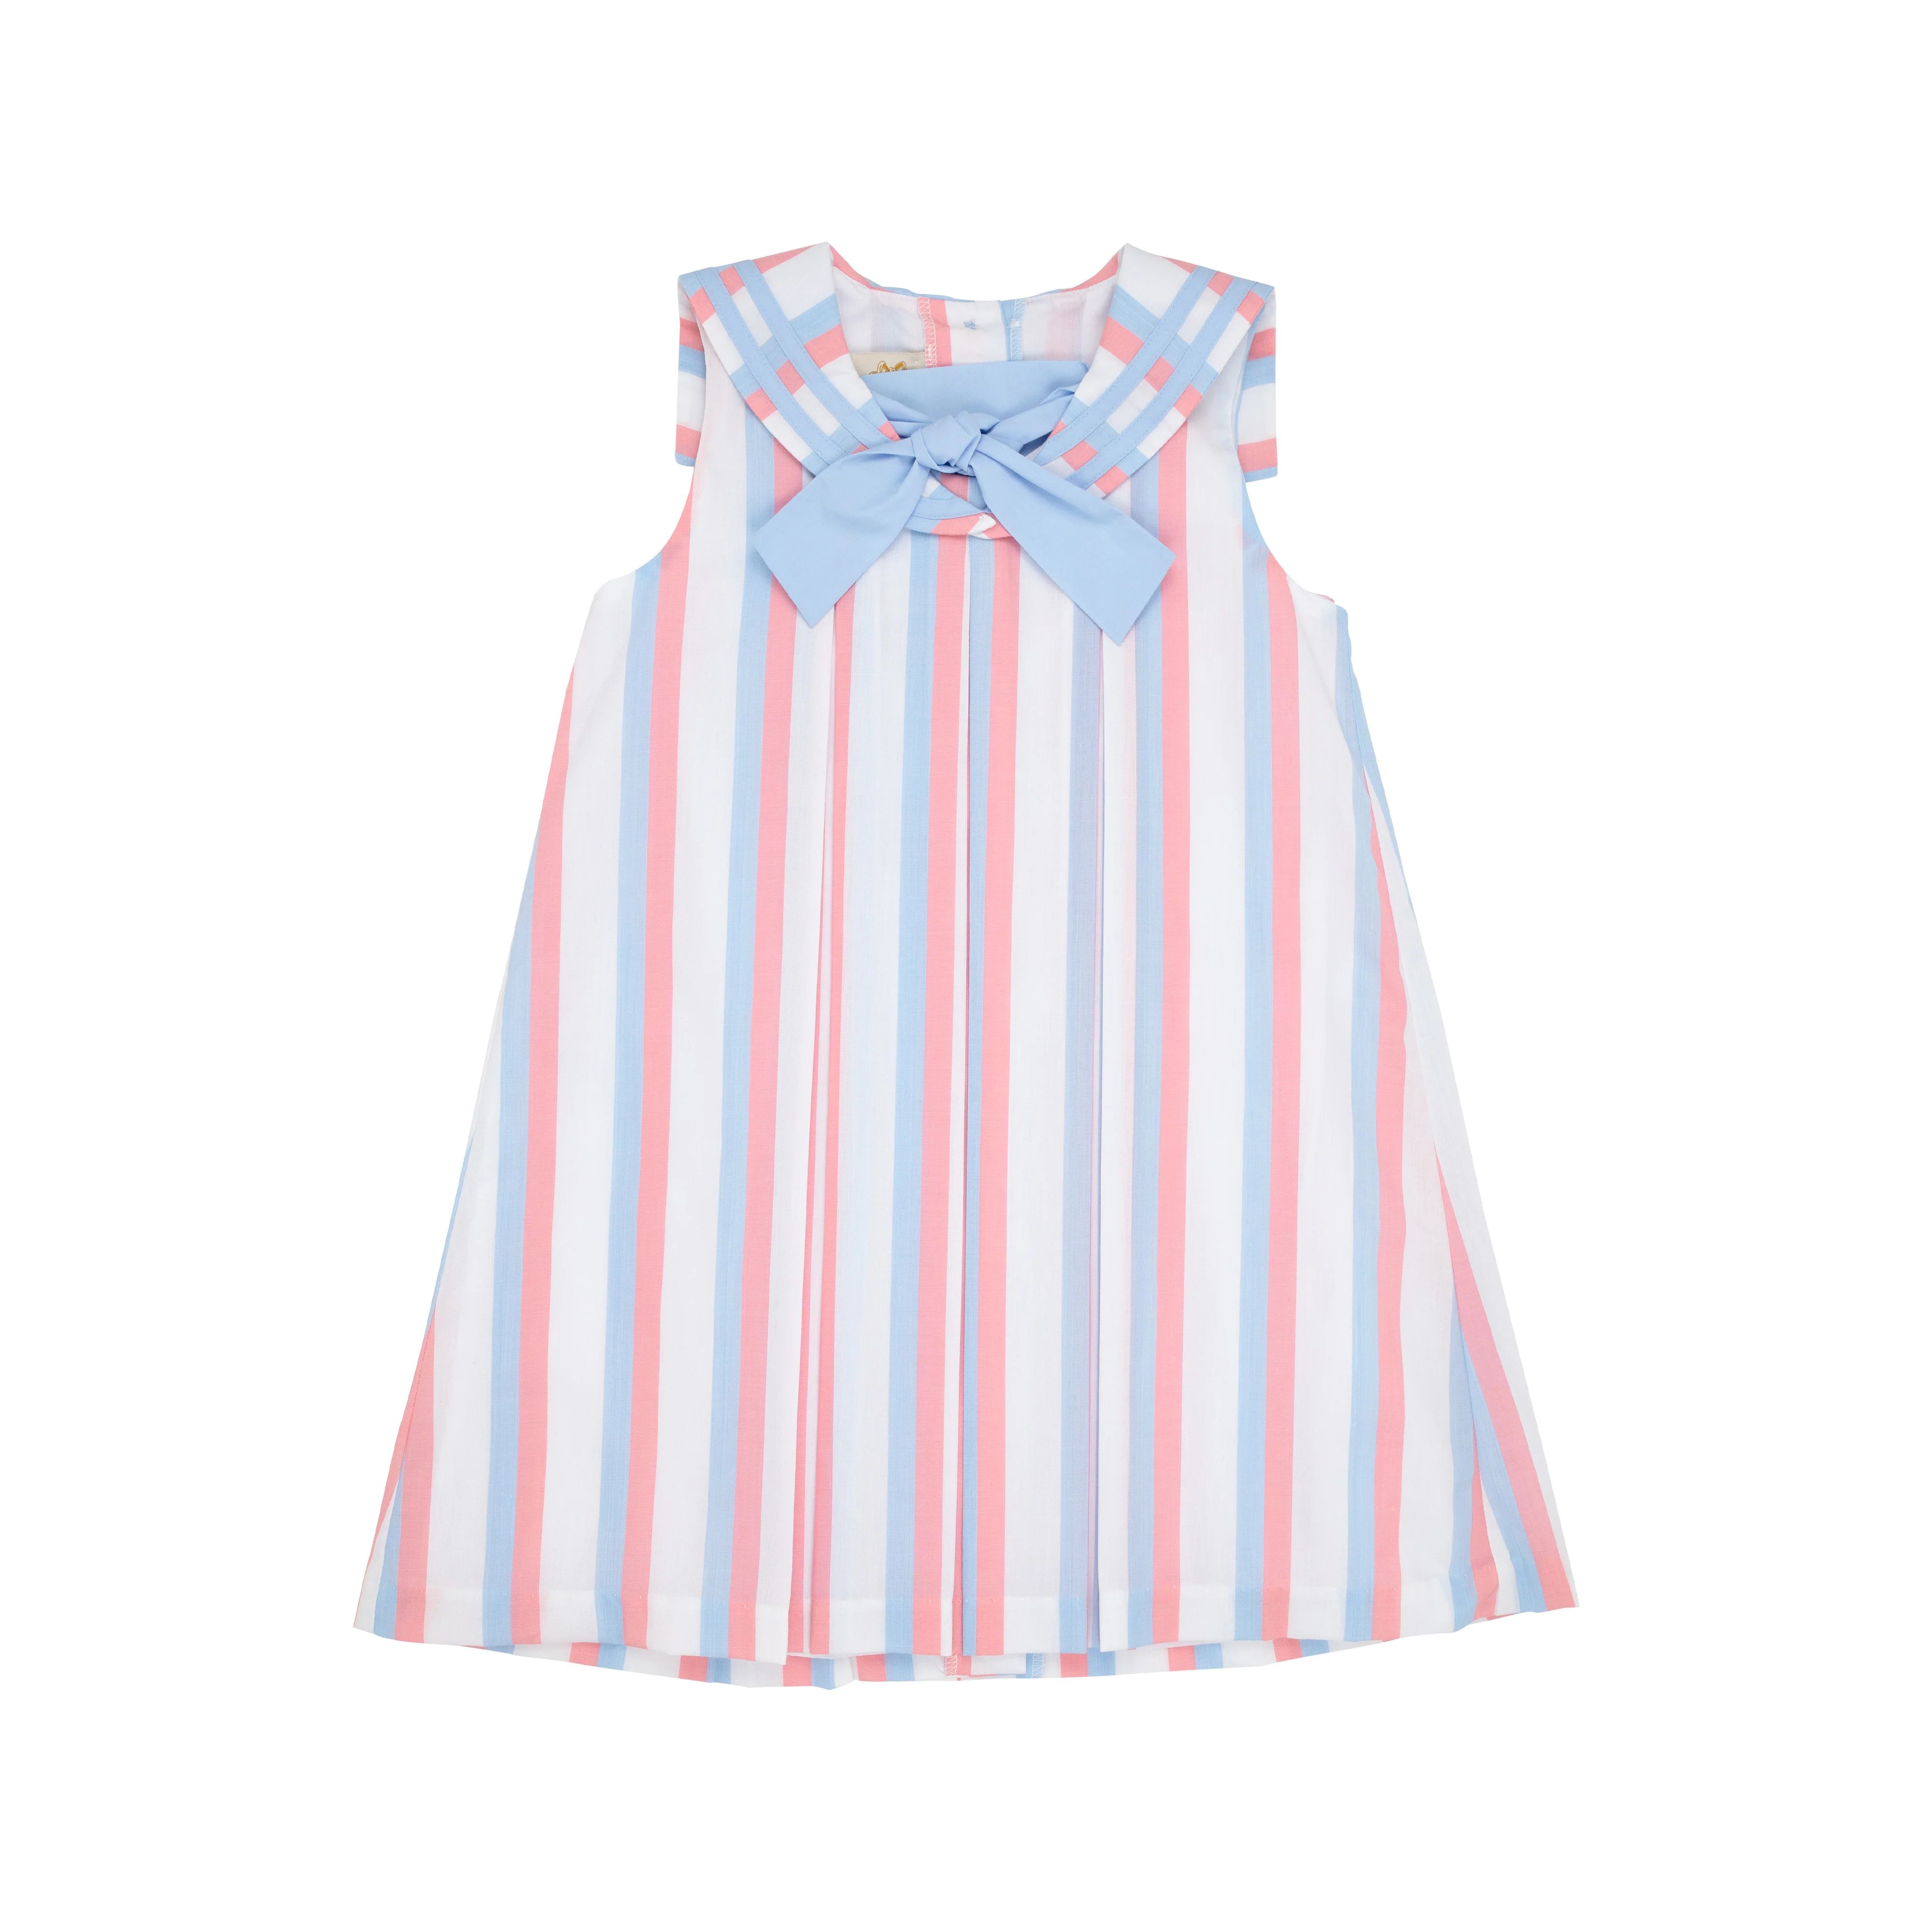 Cindy Sailor Dress - New River Nautical Stripe with Parrot Cay Coral & Beale Street Blue | The Beaufort Bonnet Company